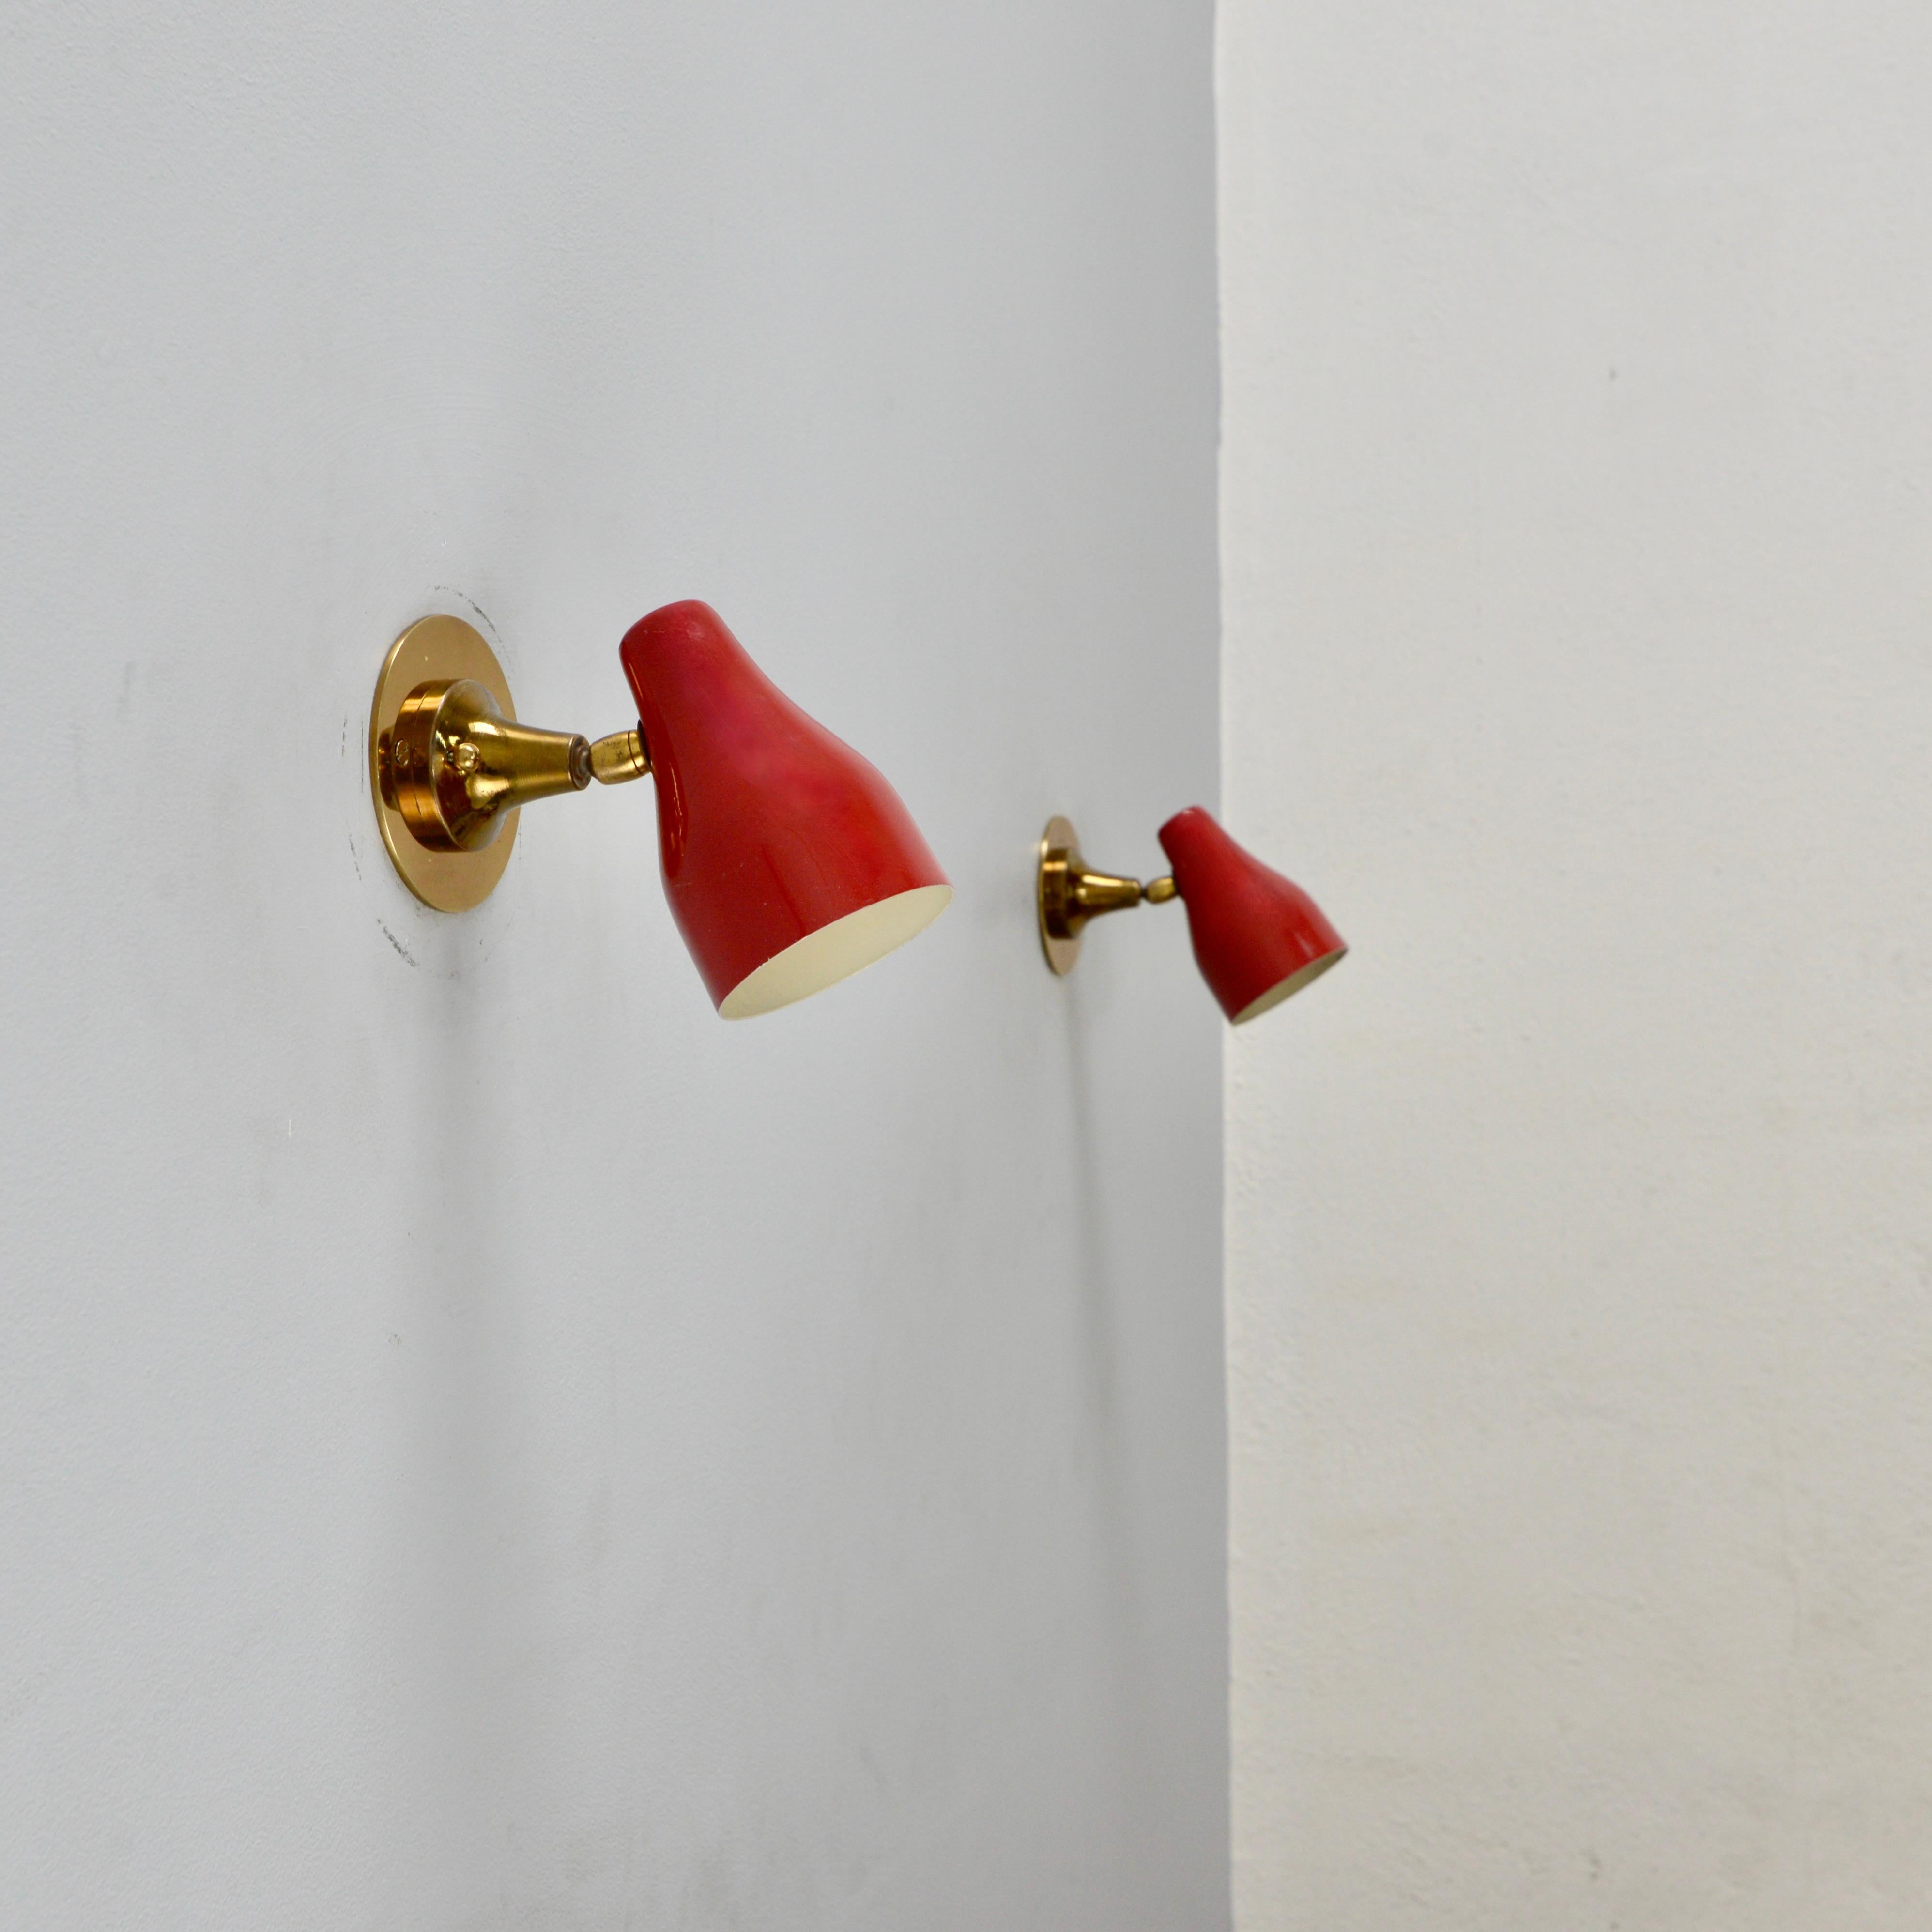 Pair of red directional Mid-Century Modern Giuseppe Ostuni sconces from Italy. Original paint and patina brass. Partially restored wiring of a single E12 based socket per sconce. Maximum wattage 40 watts per sconce. Back plate has 2 3/4